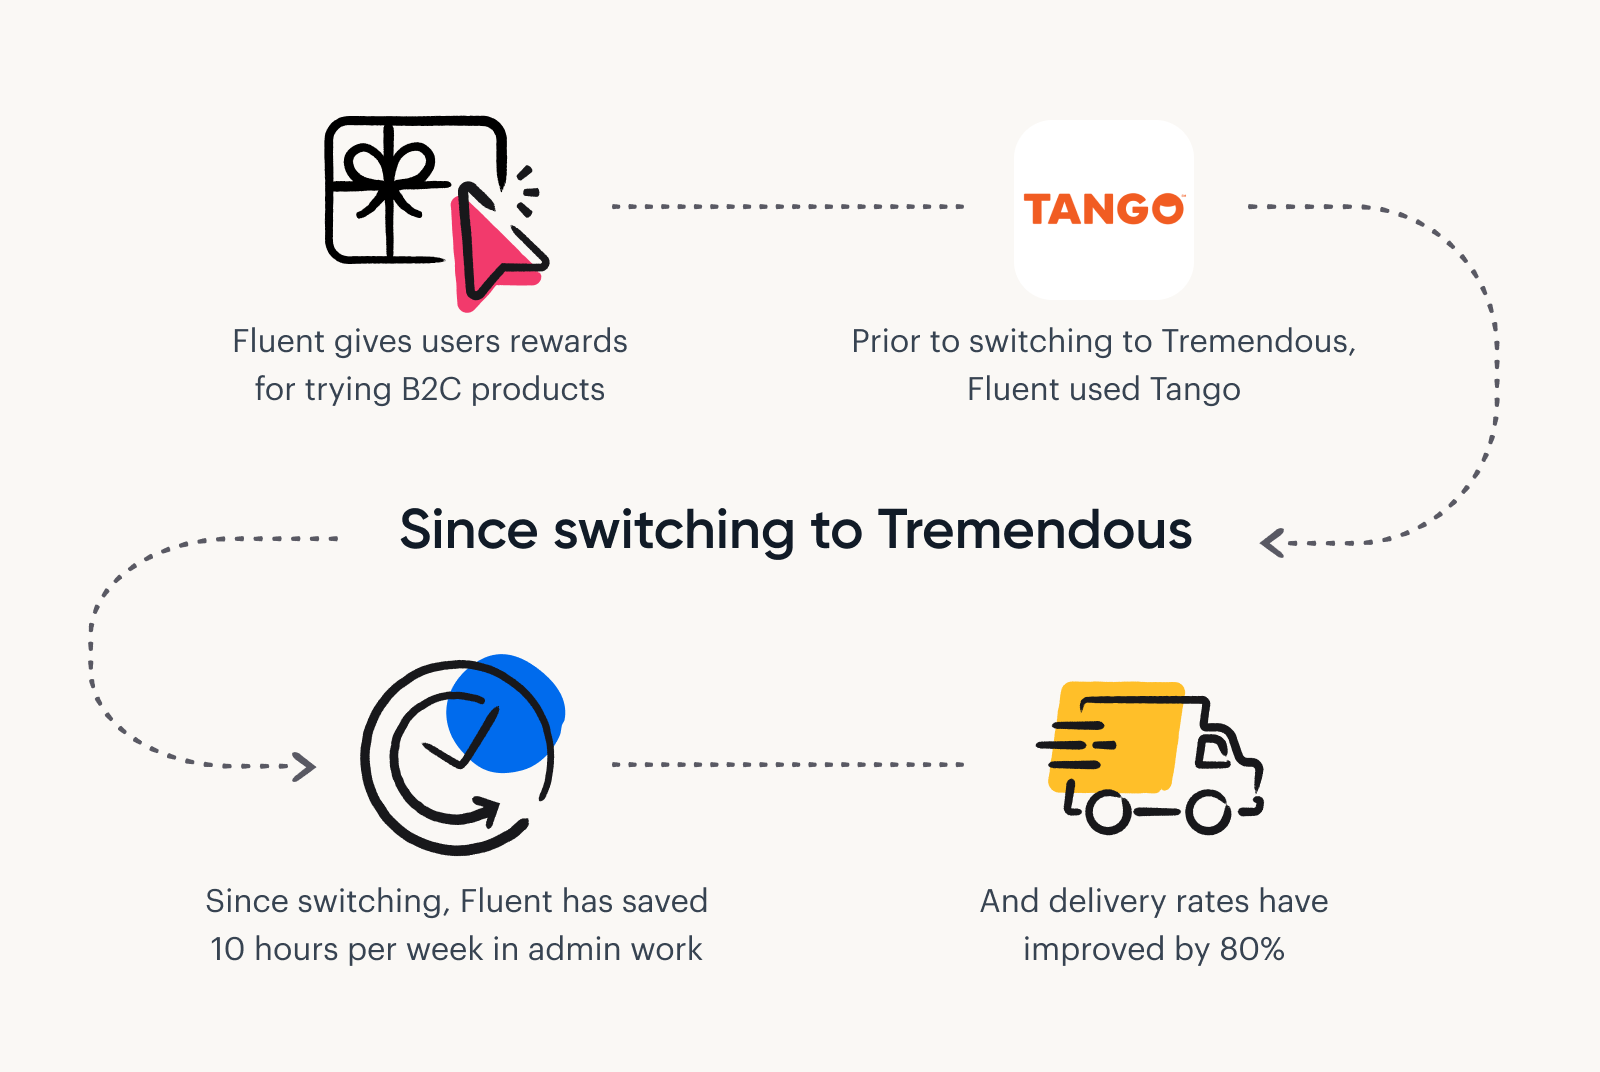 Since switching from Tango to Tremendous, fluent has seen delivery rates improve by 80% and reduced admin work by 10 hours per week.